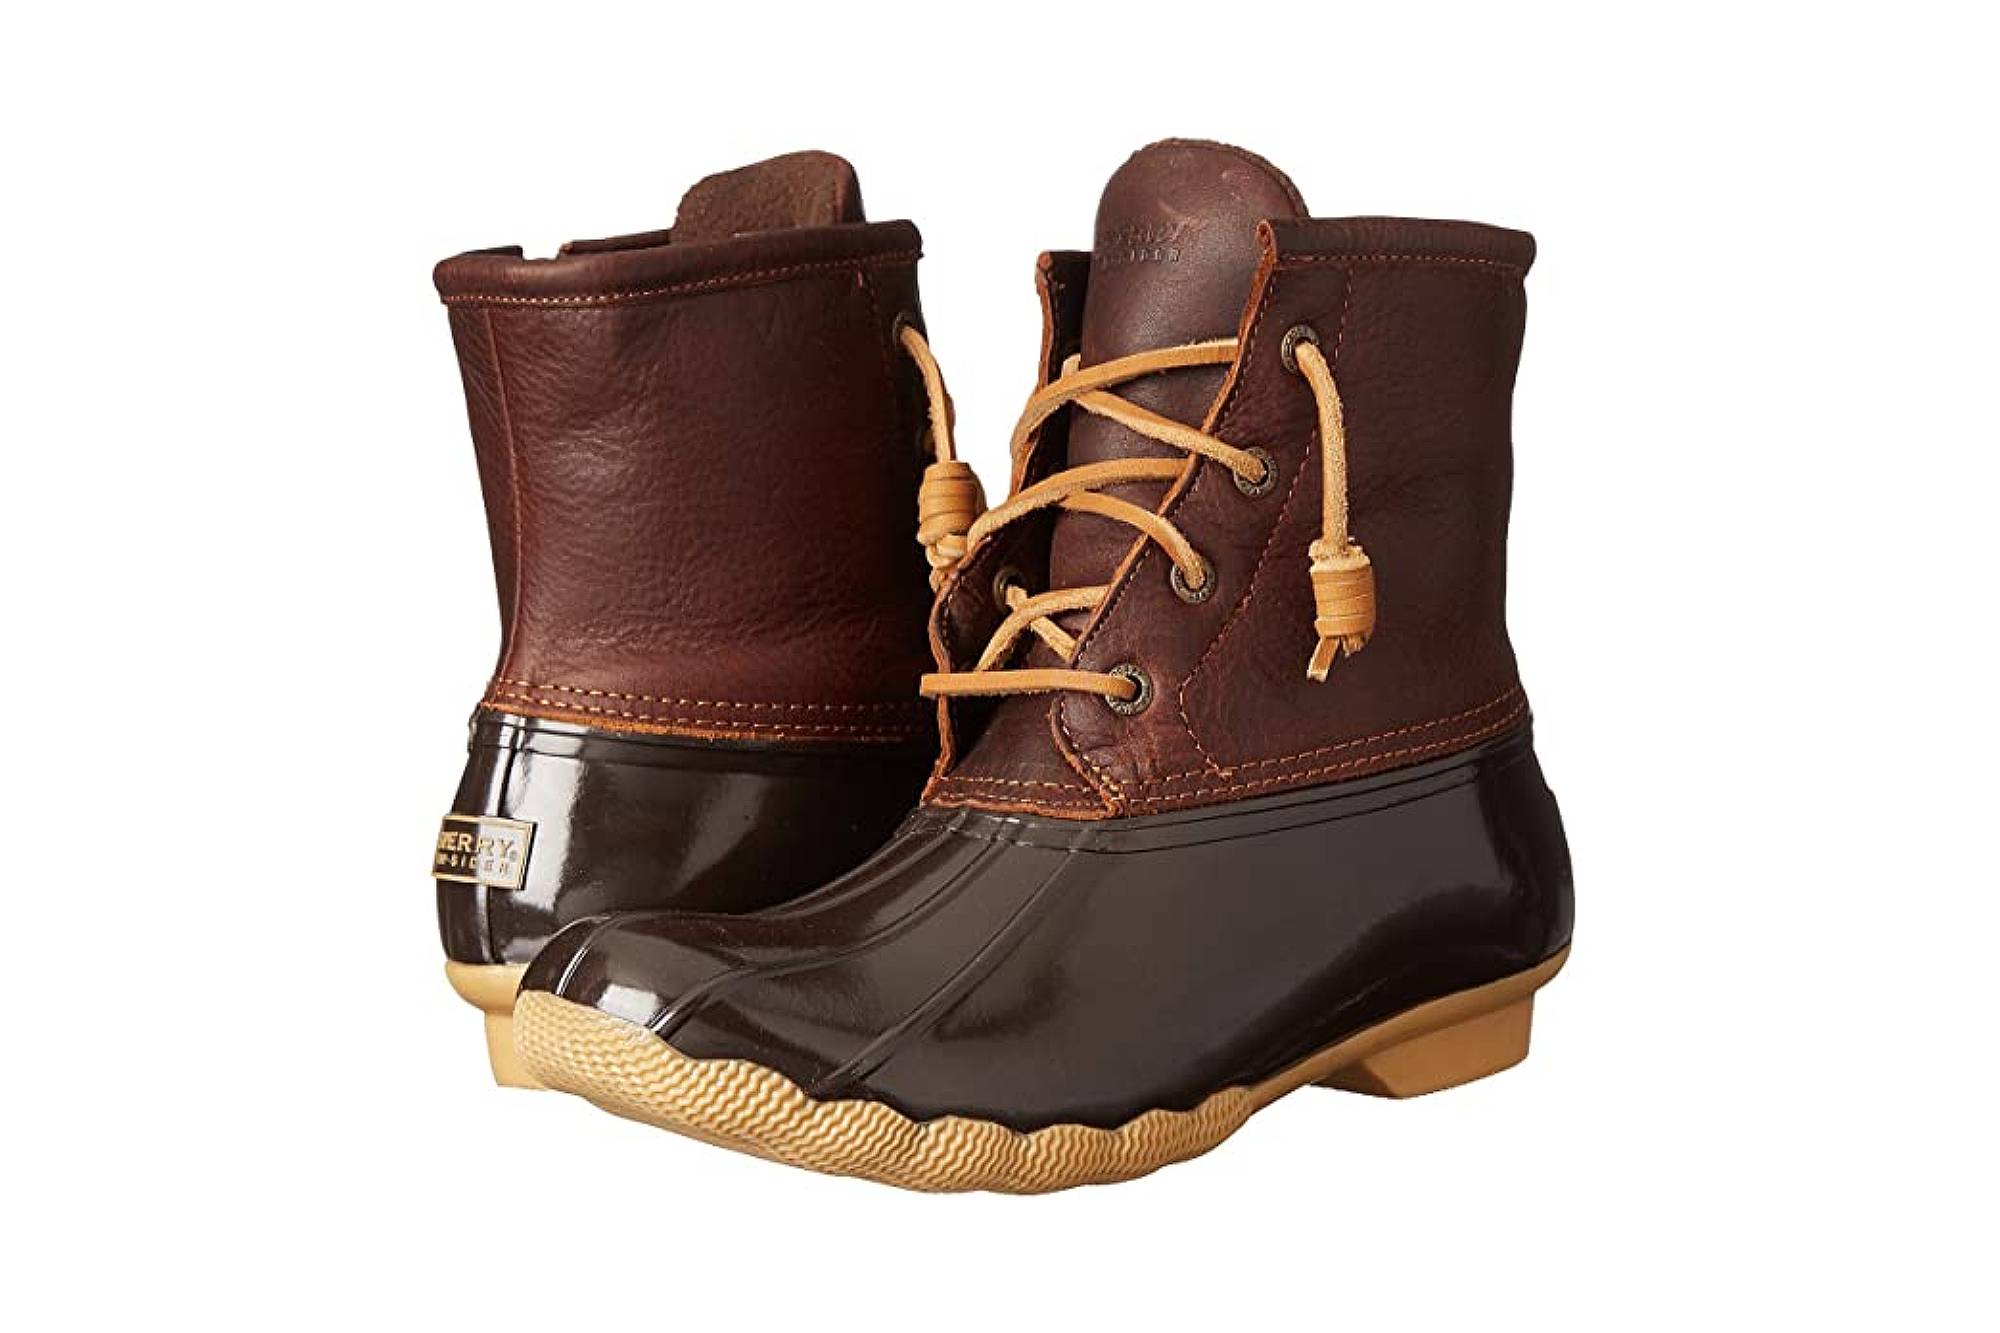 sperry saltwater boots sale